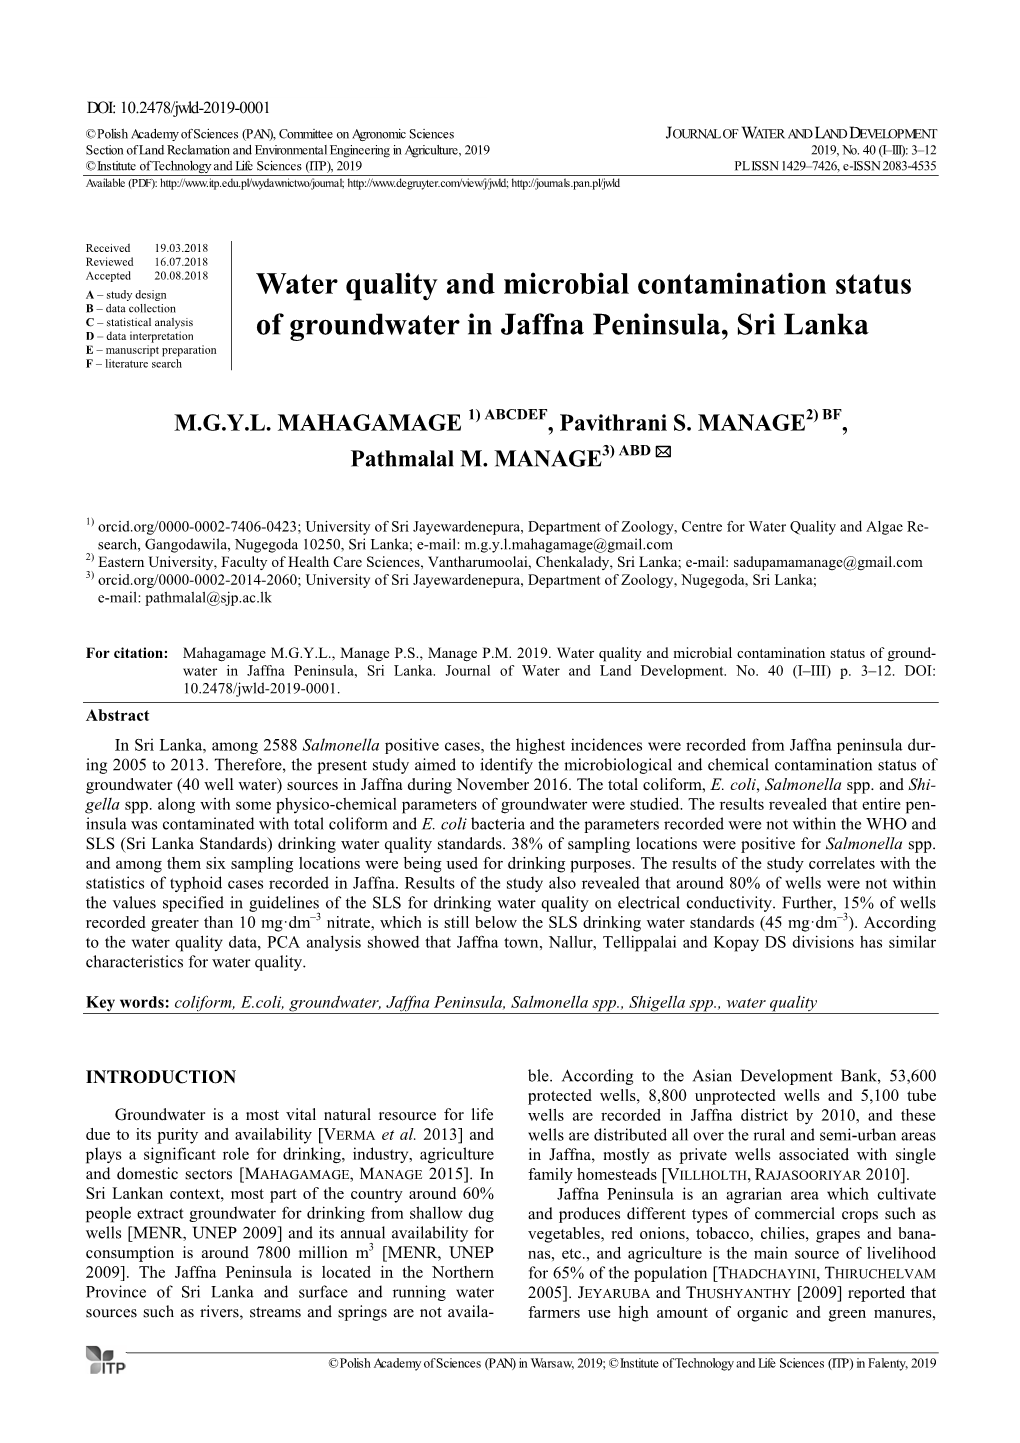 Water Quality and Microbial Contamination Status of Ground- Water in Jaffna Peninsula, Sri Lanka